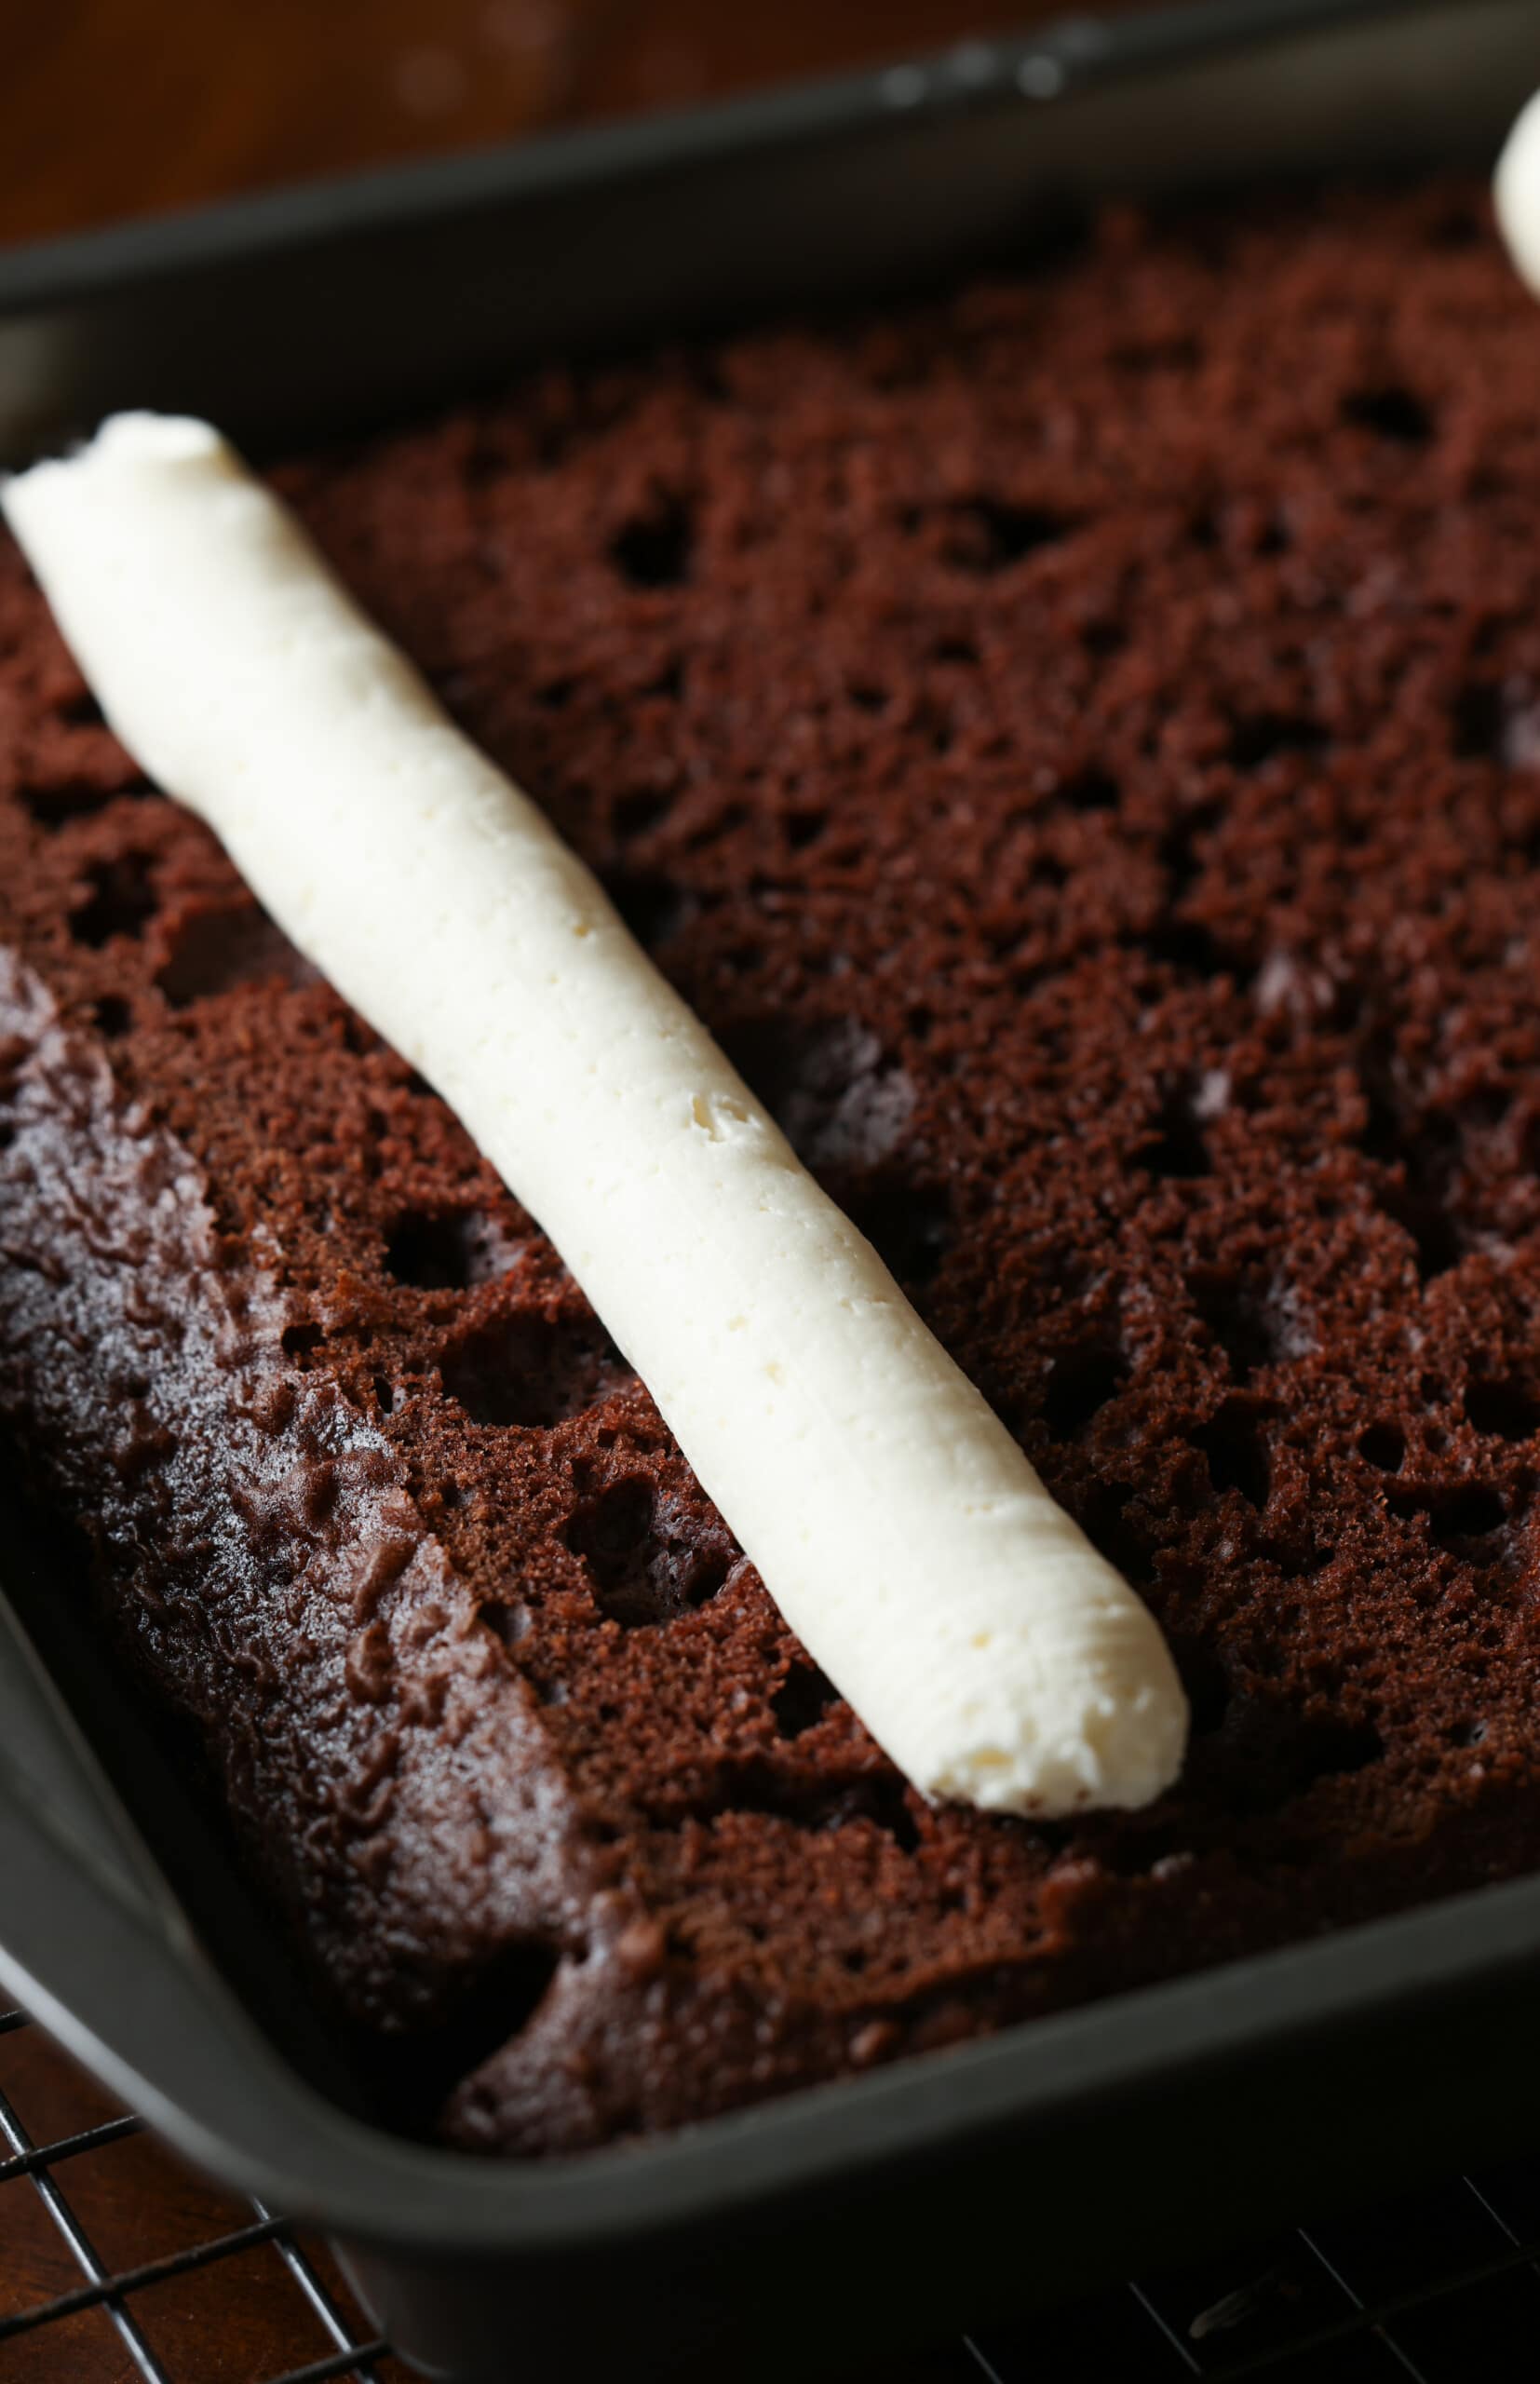 Piped tube of vanilla frosting on top of chocolate cake